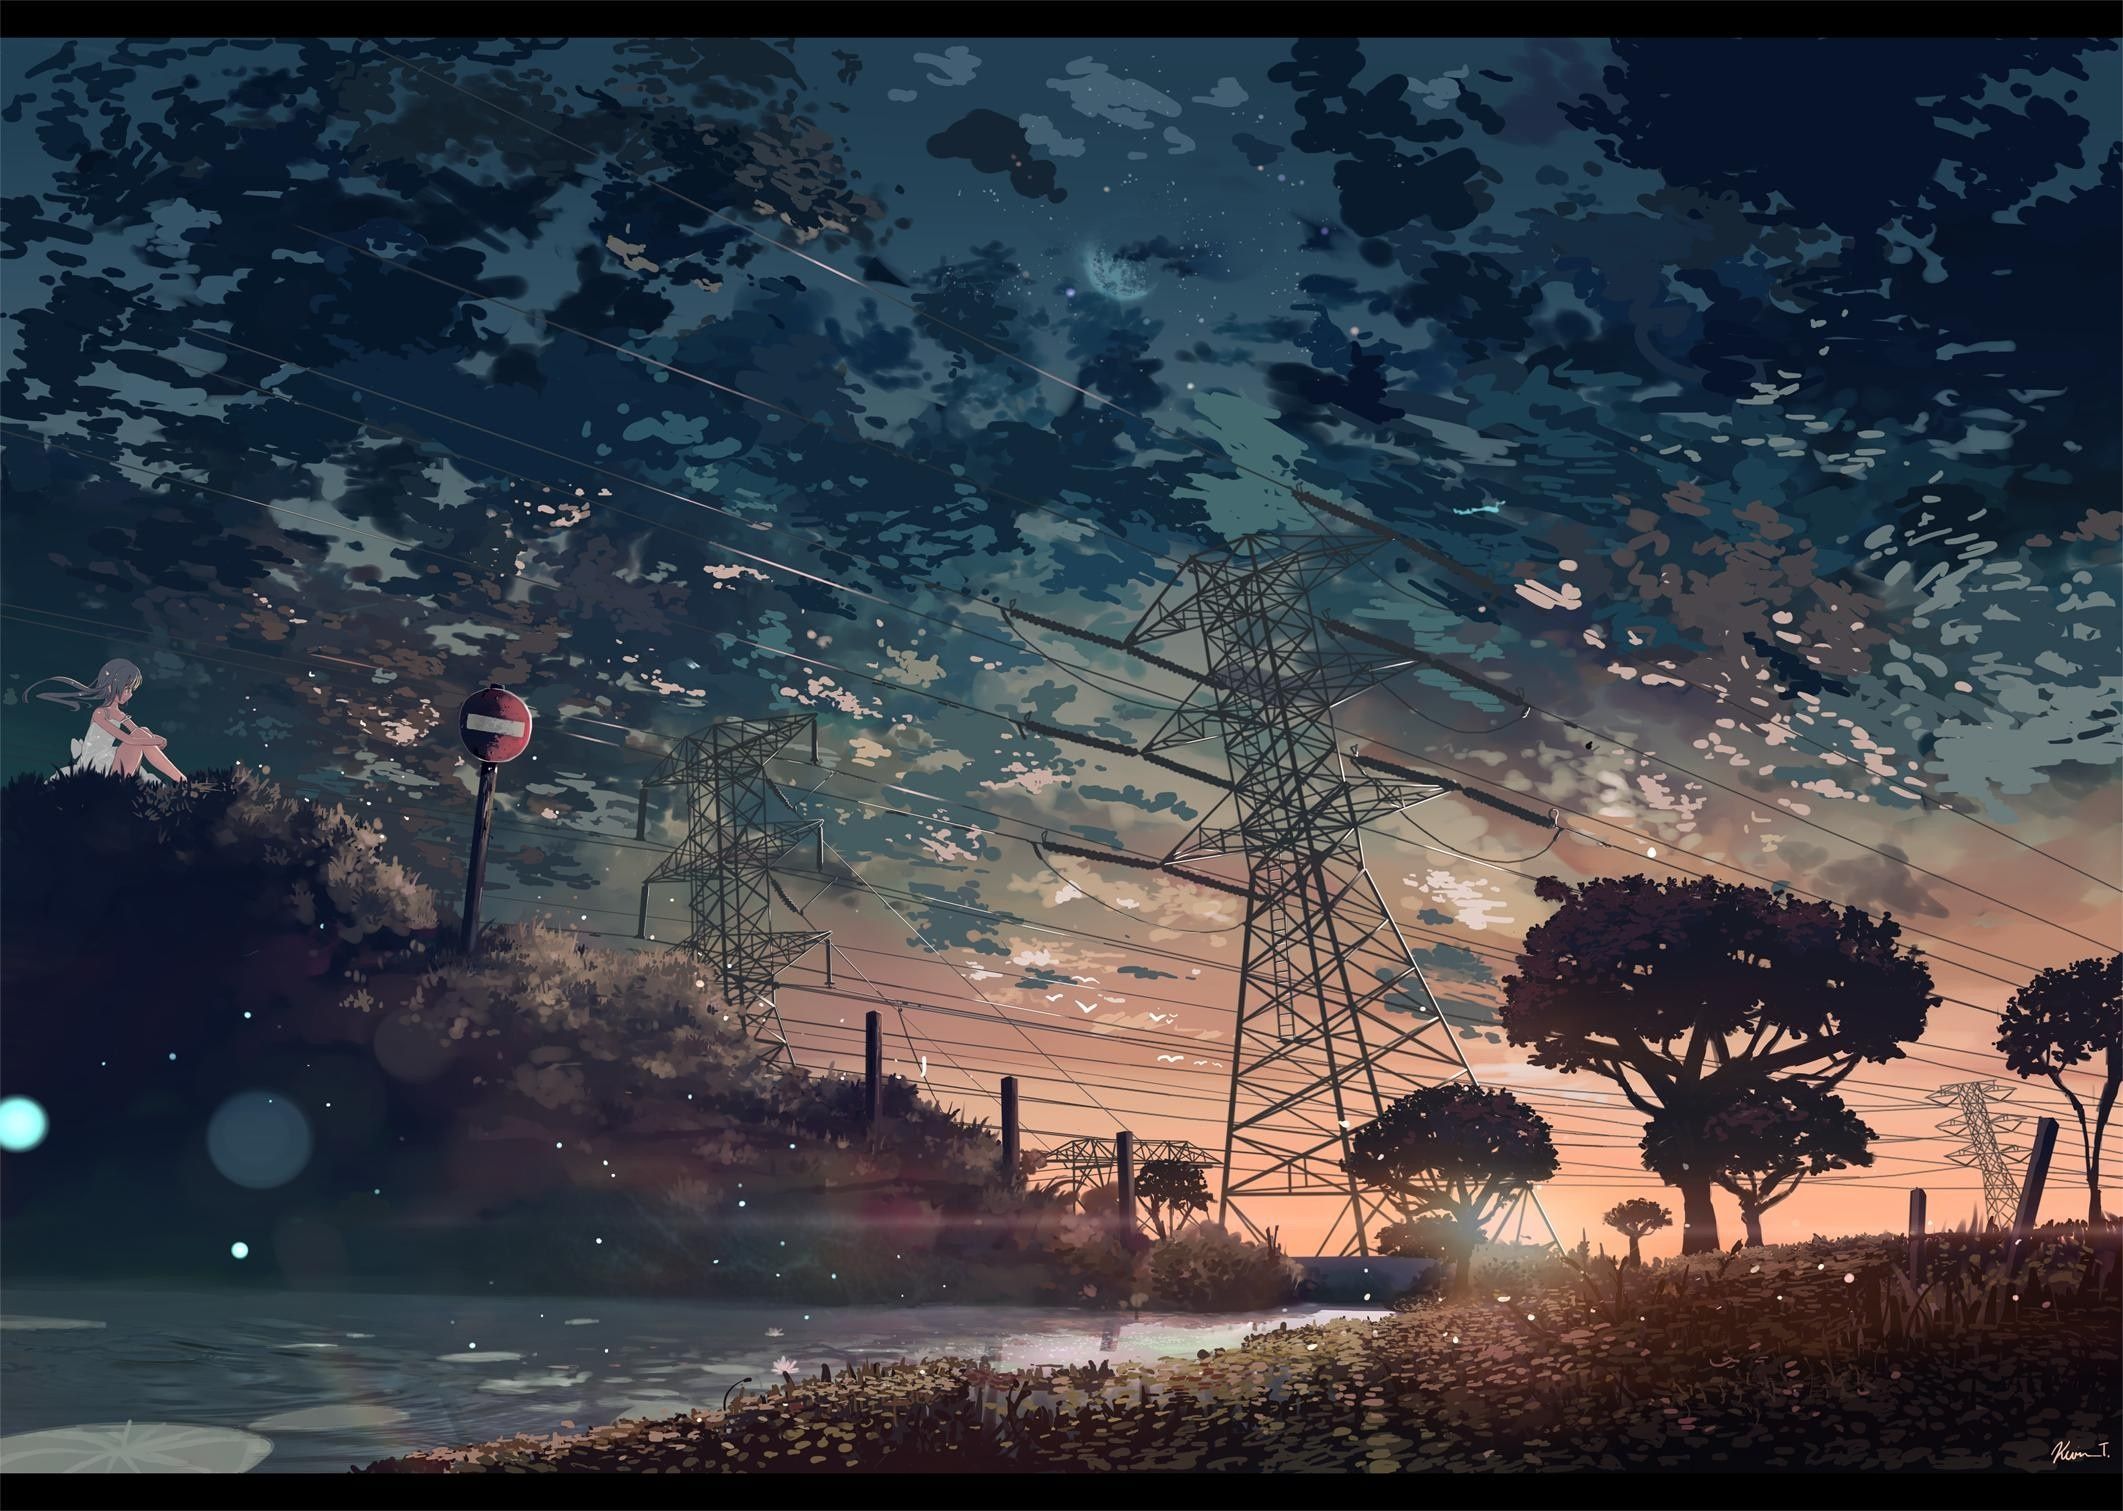 This image is a digital painting of a landscape at sunset. The sky is filled with dark clouds and shooting stars. In the foreground, there is a river flowing to the right. On the riverbank, there are several trees, and a few power lines can be seen going across the sky. - Anime landscape, sunrise